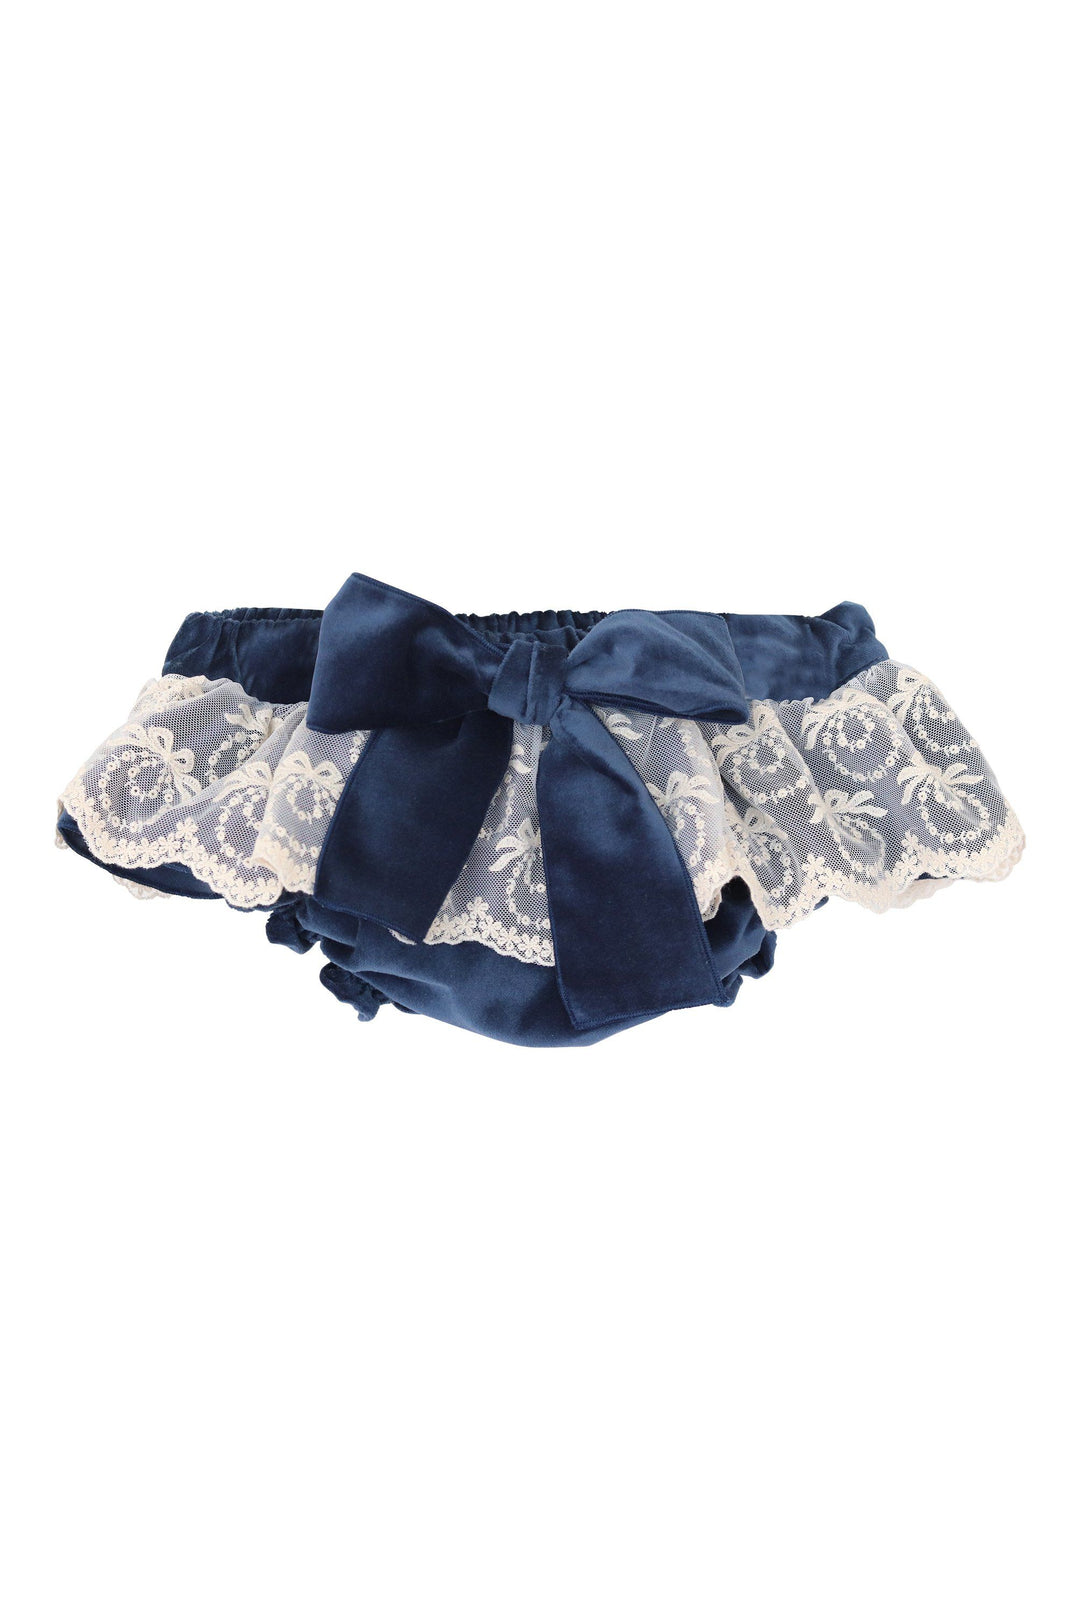 Phi "Margot" Midnight Blue Velvet Lace Bloomers | iphoneandroidapplications